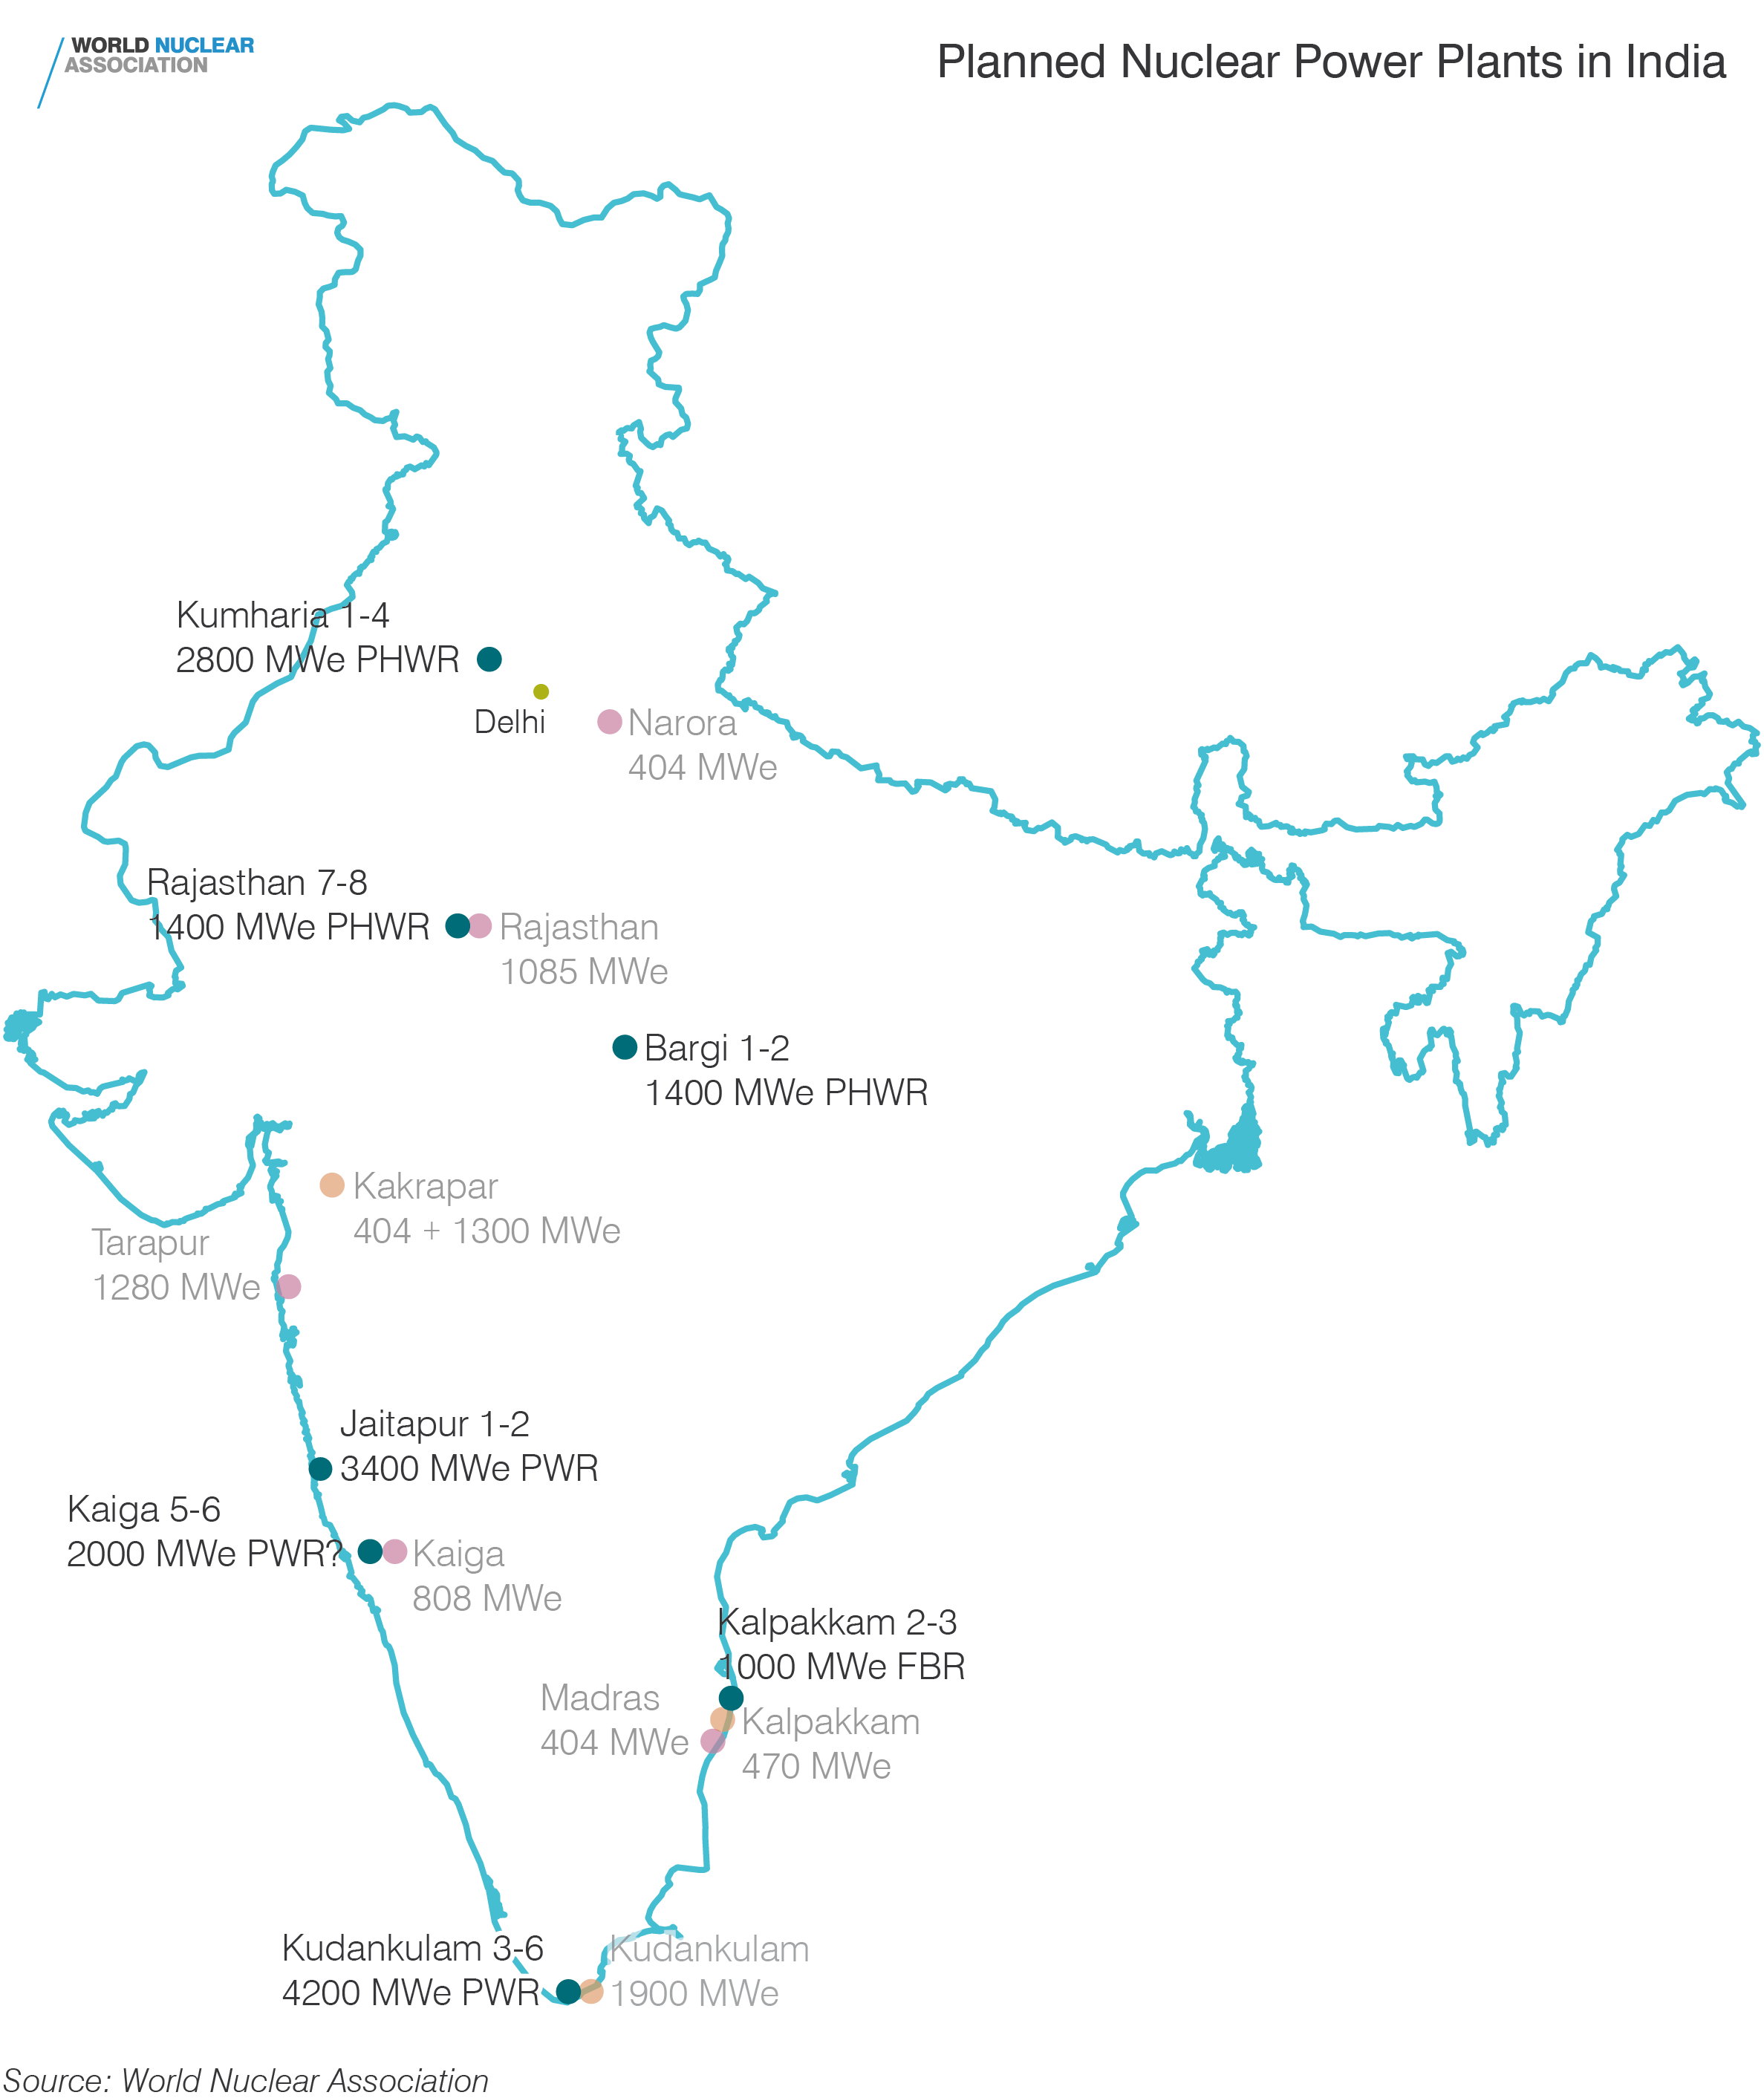 Planned reactors in India